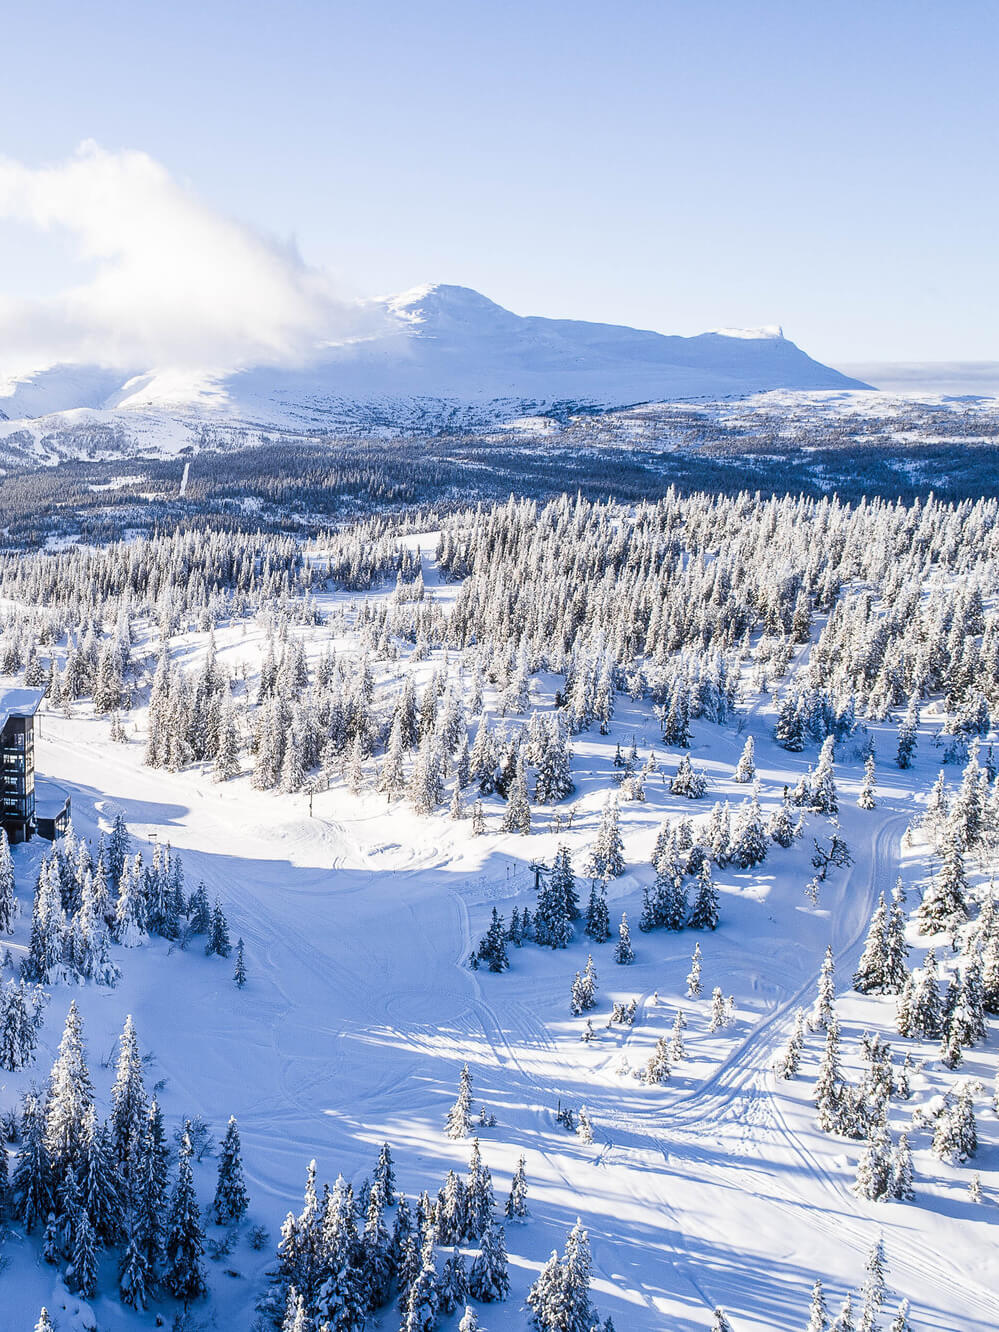 Picture of Åre from above.